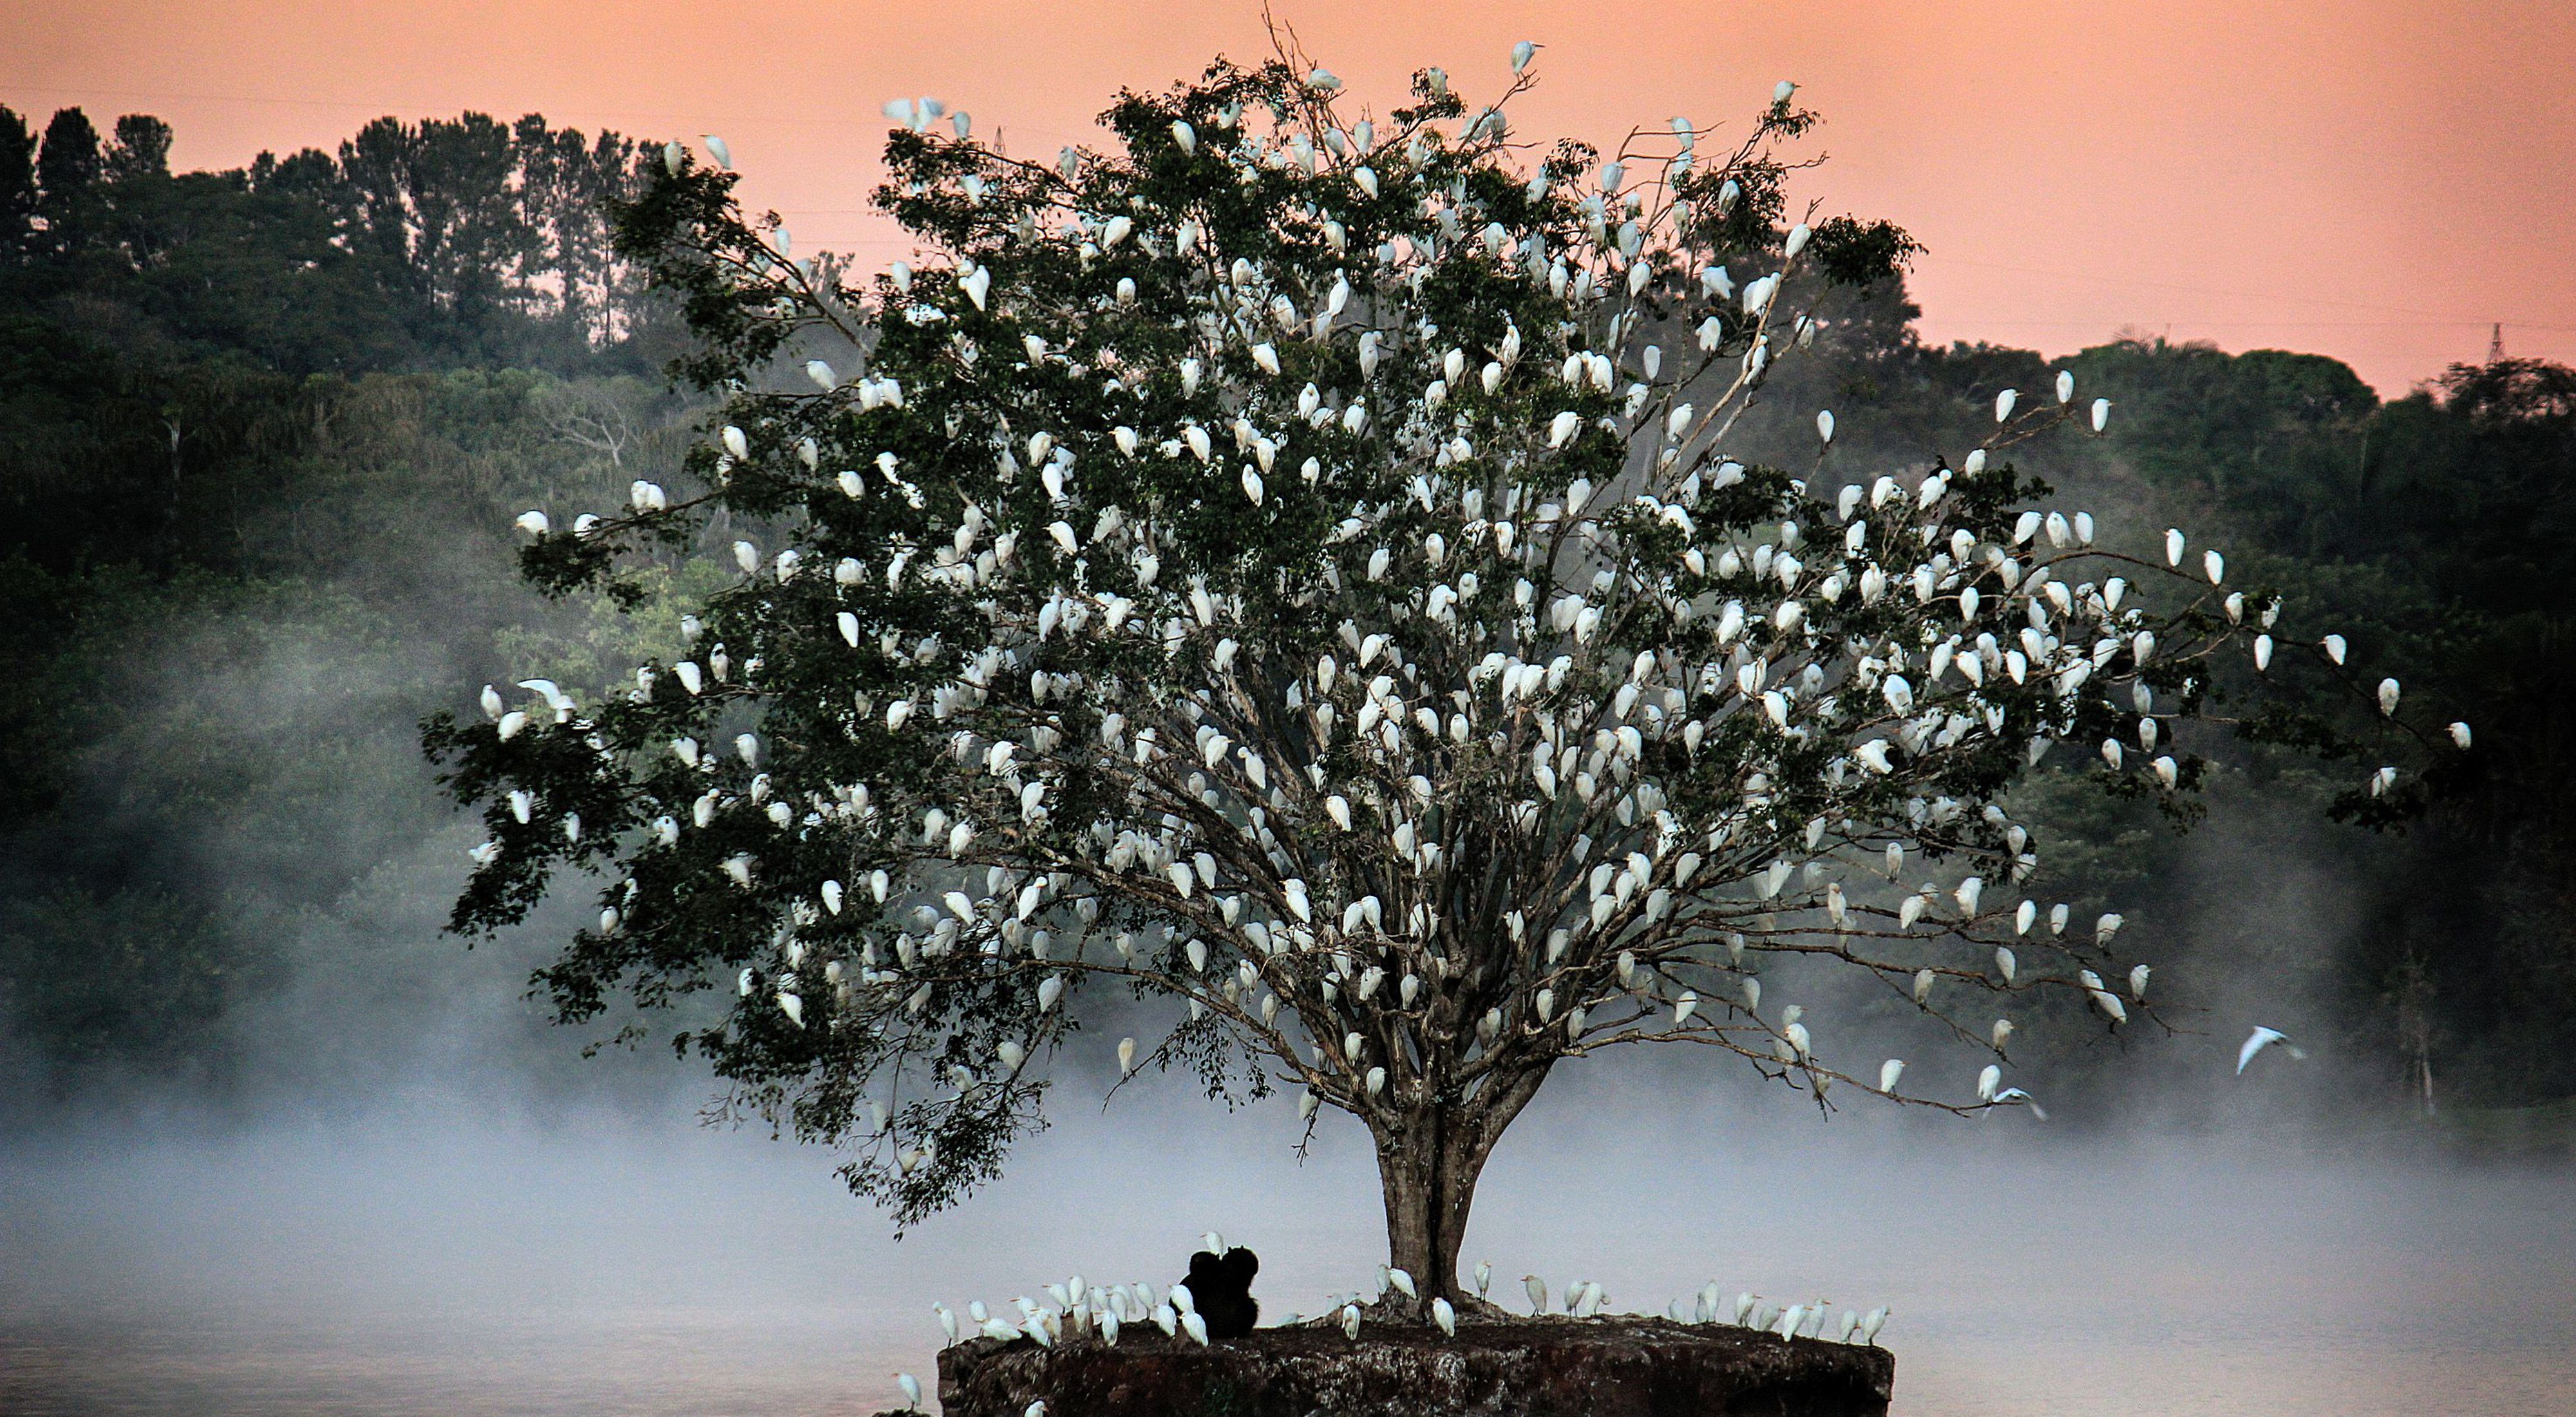 A small island with a tree in Uberlândia, Minas Gerais, Brazil, welcomes a flock of herons every evening.